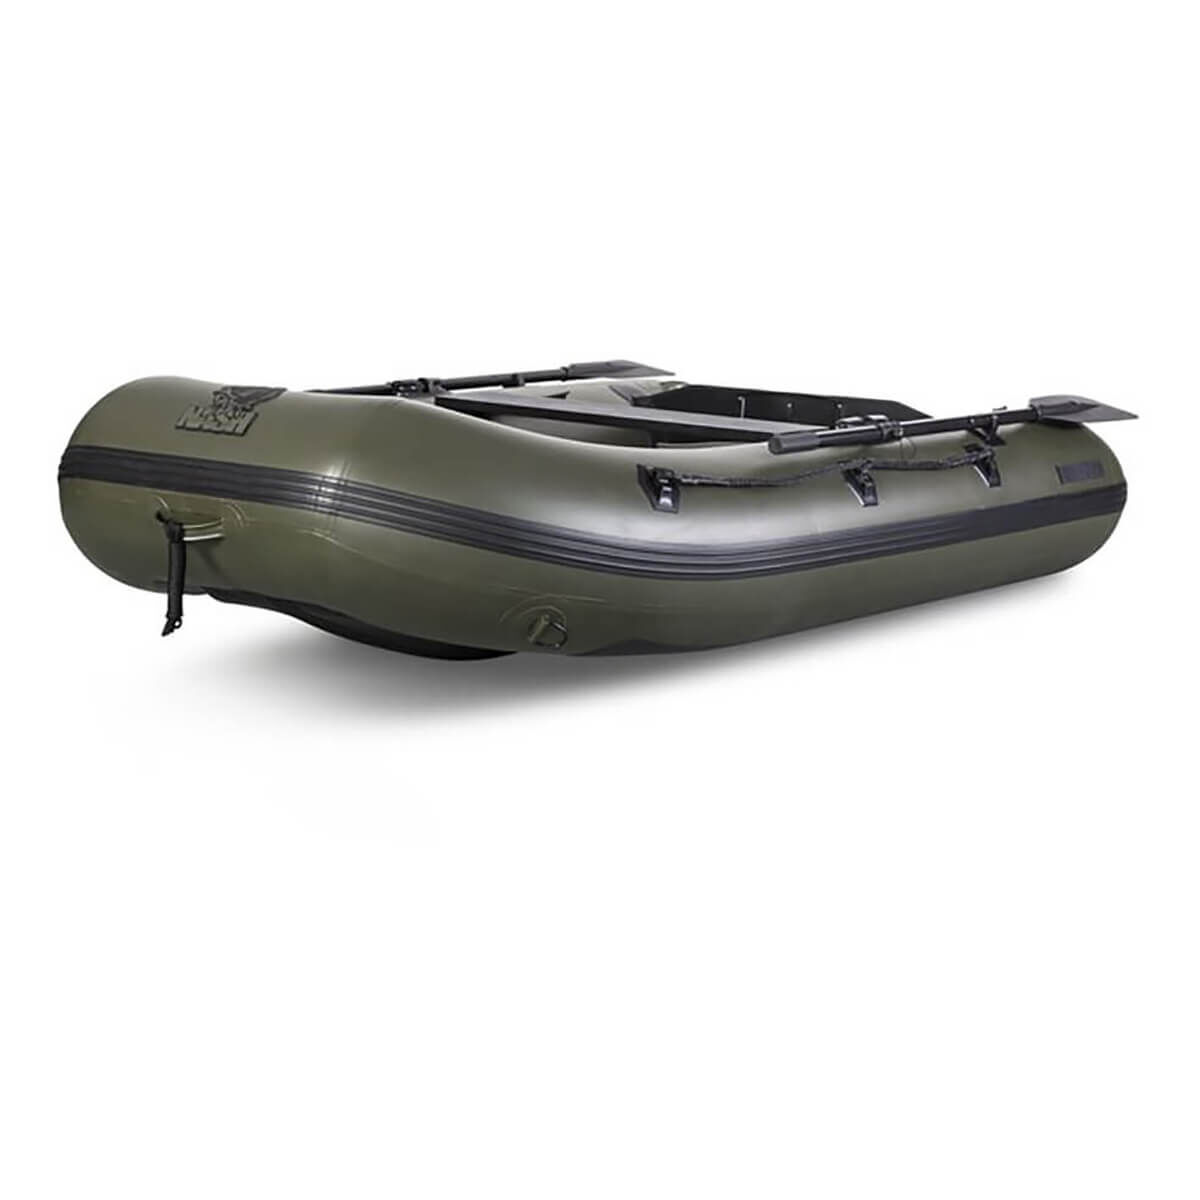 Schlauchboot Nash Boat Life Inflatable Boat 240